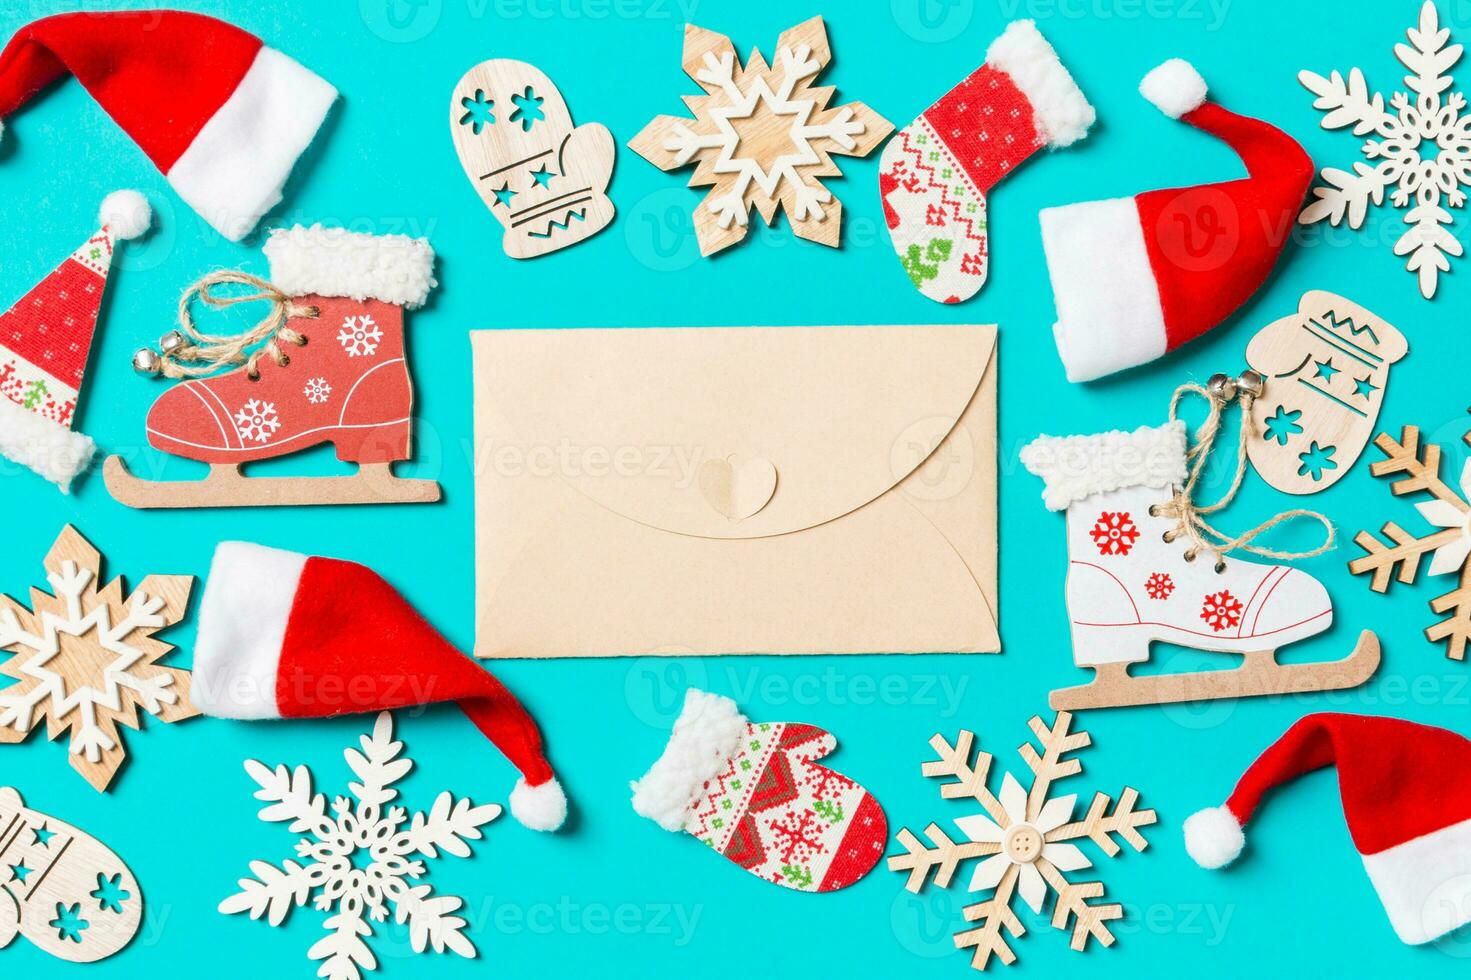 Top view of craft envelope with Christmas decorations and Santa hats on blue background. Happy holiday concept photo